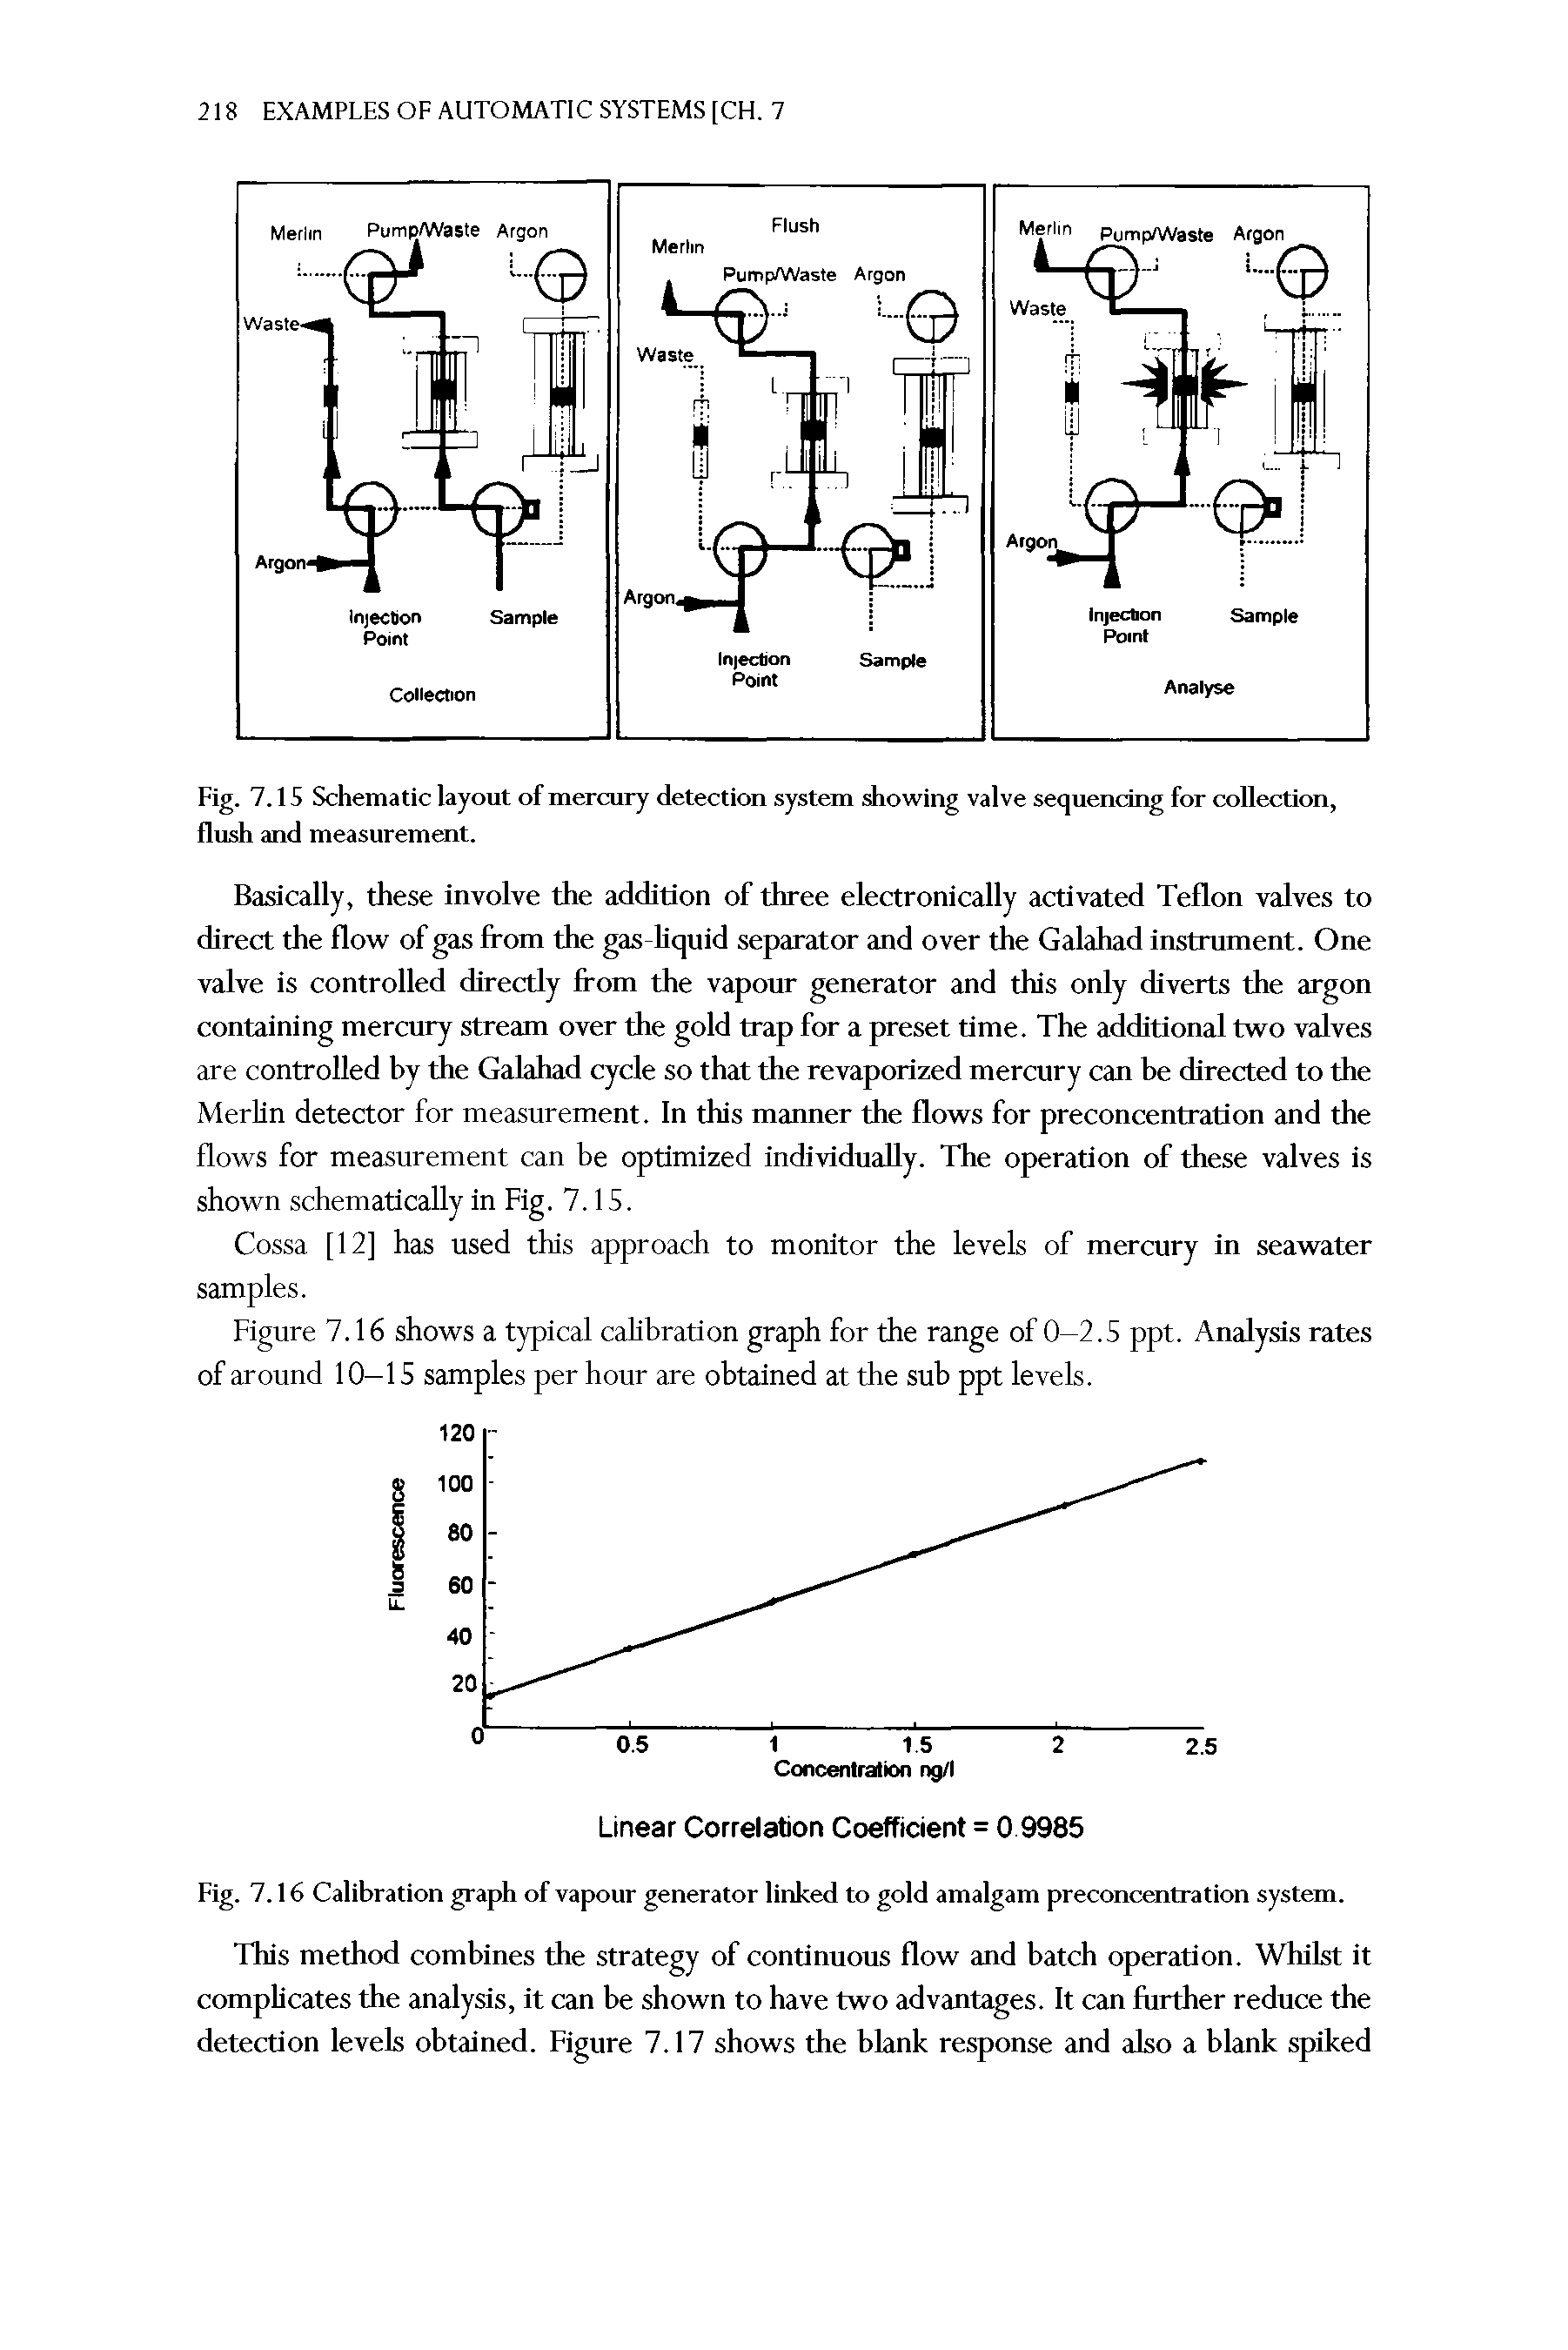 Fig. 7.16 Calibration graph of vapour generator linked to gold amalgam preconcentration system.